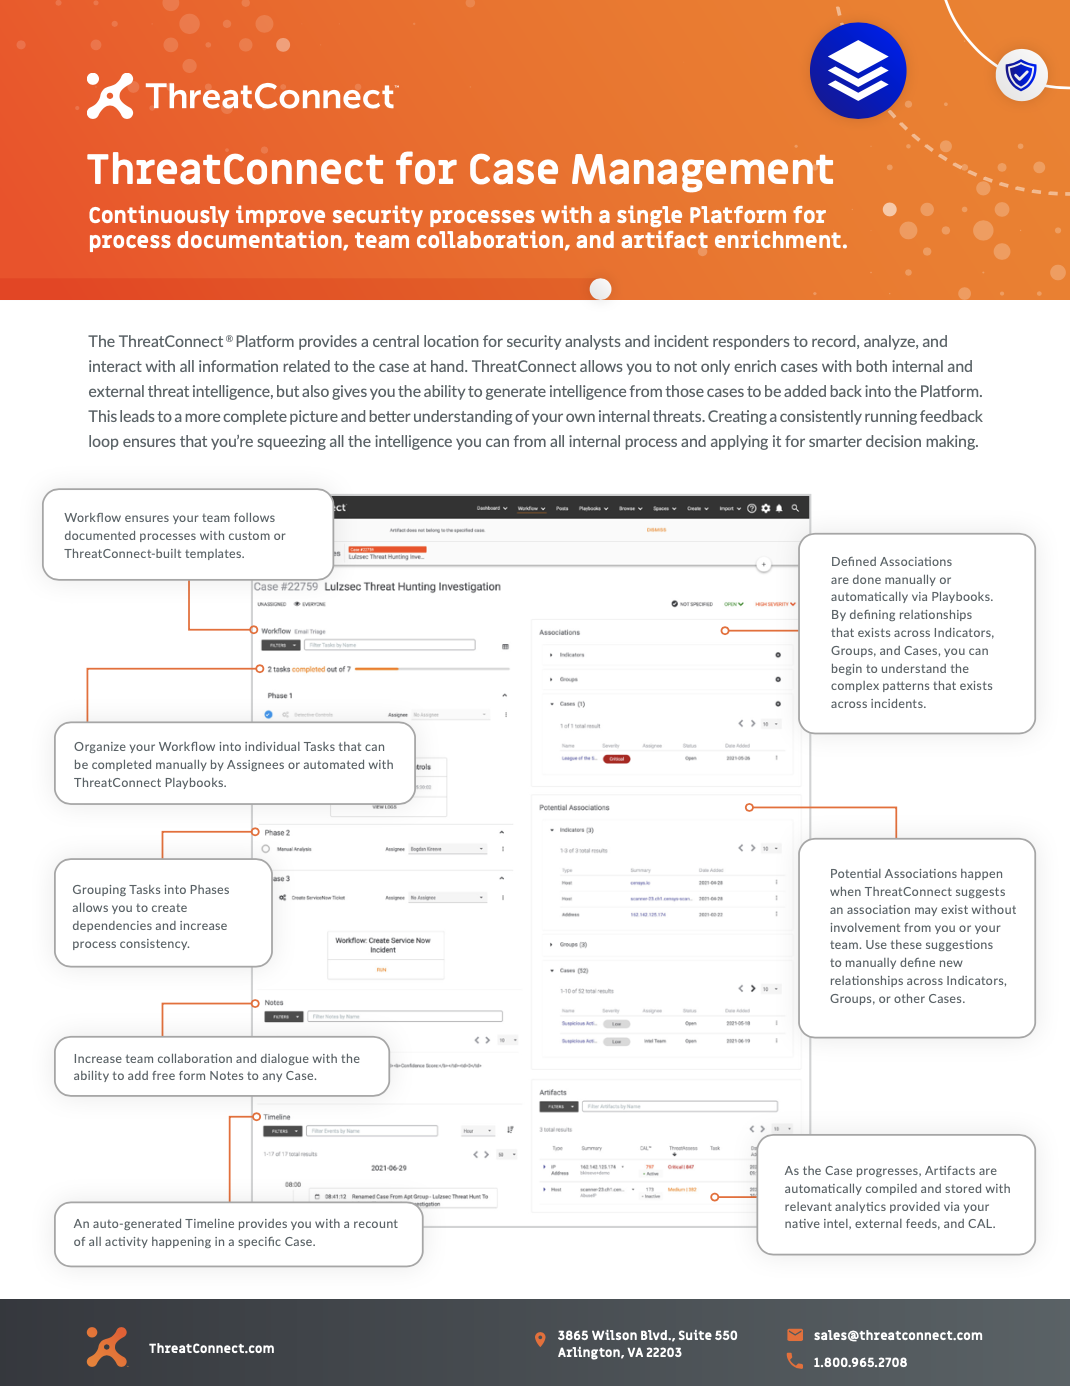 an advertisement for ThreatConnect for case management for security analysts and incident responders